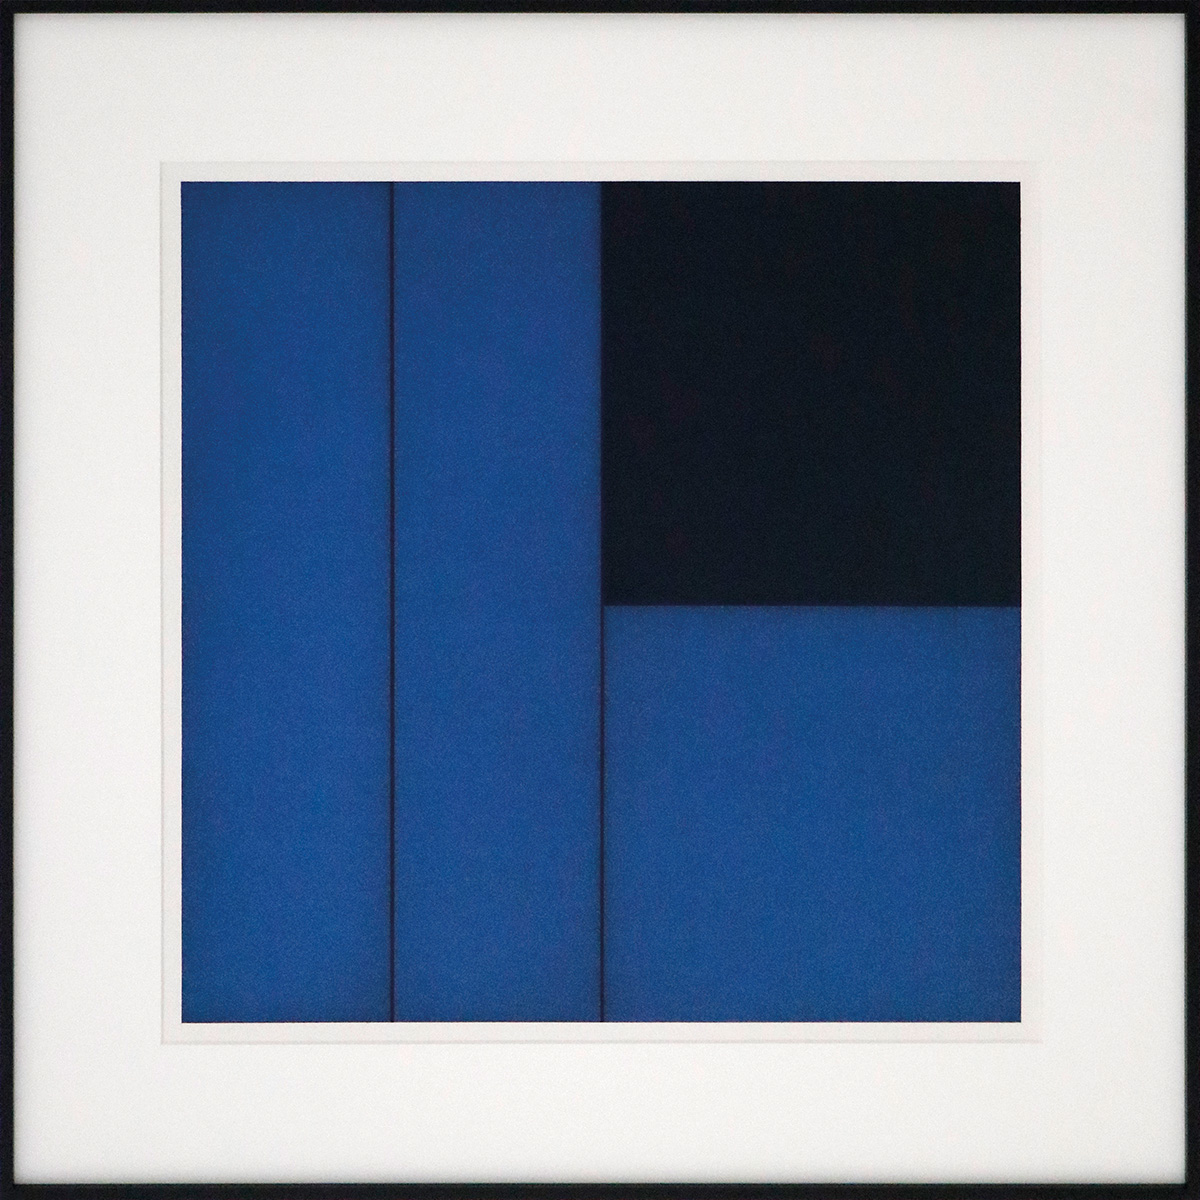 Untitled Blue, 200450 x 50 cm in 70 x 70 cmAcrylic and charcoal on paper; framed, museum glass